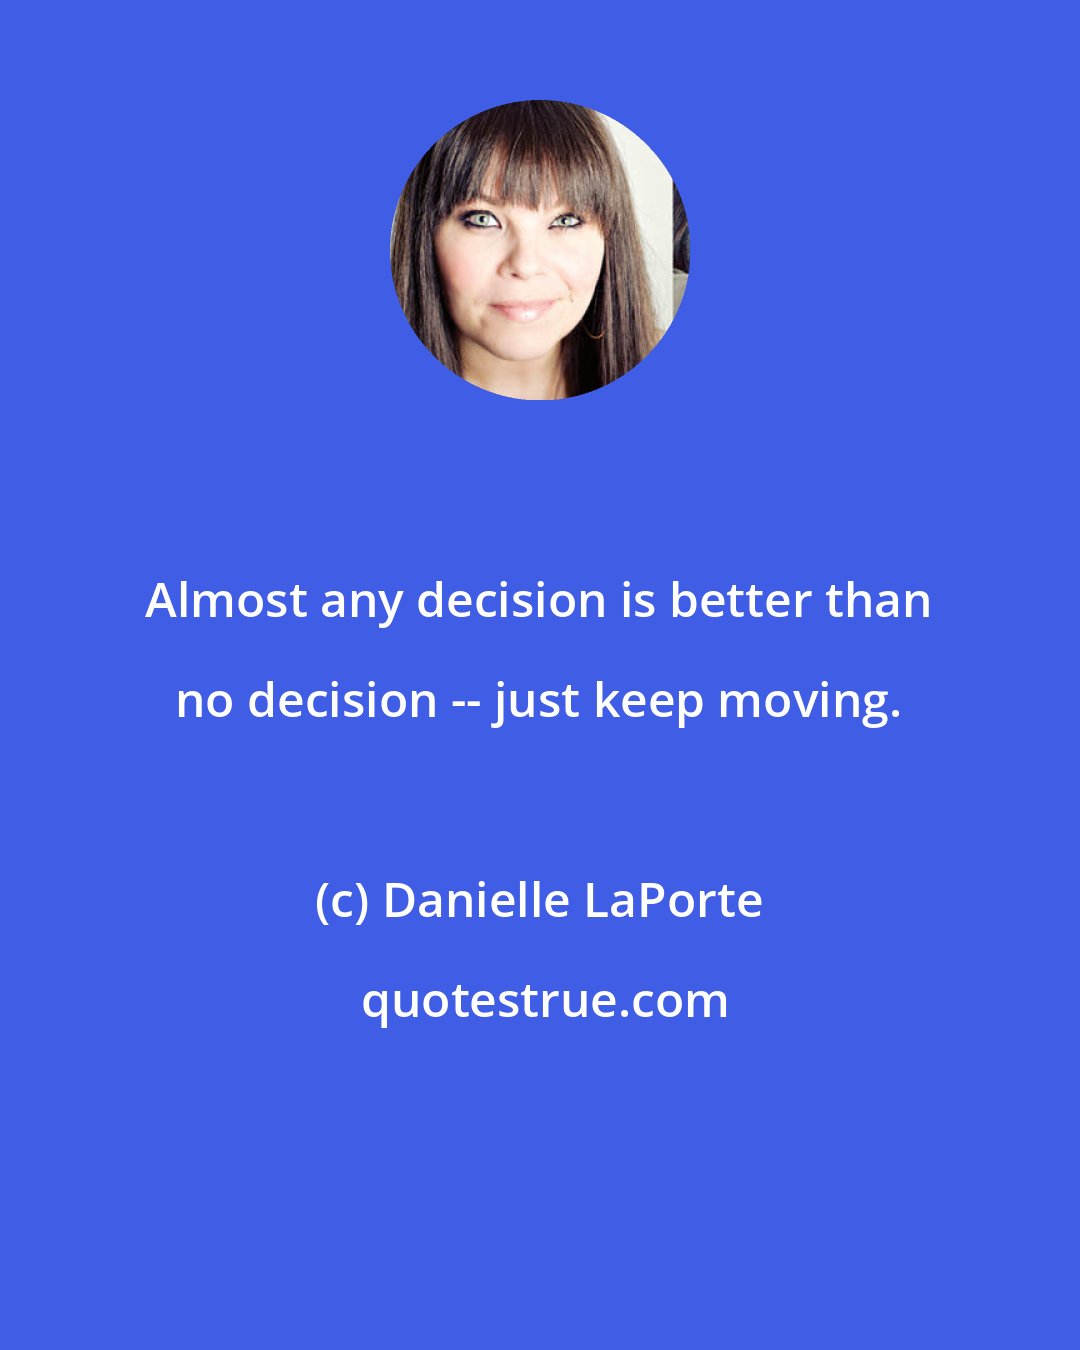 Danielle LaPorte: Almost any decision is better than no decision -- just keep moving.